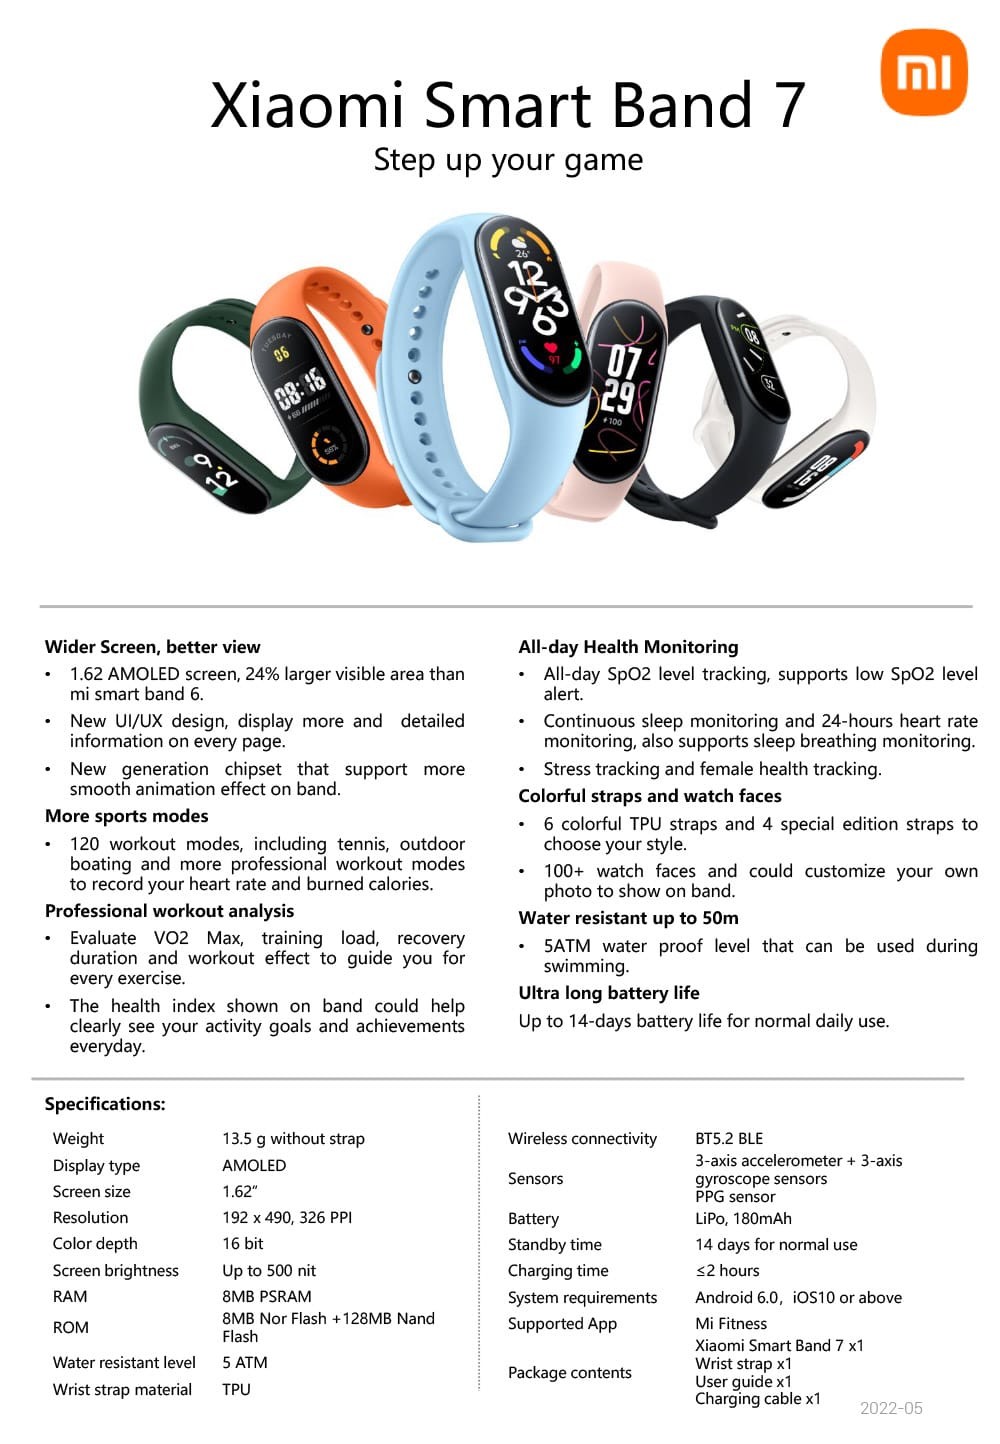 one-pager_mi_smart_band_7_0509.jpg